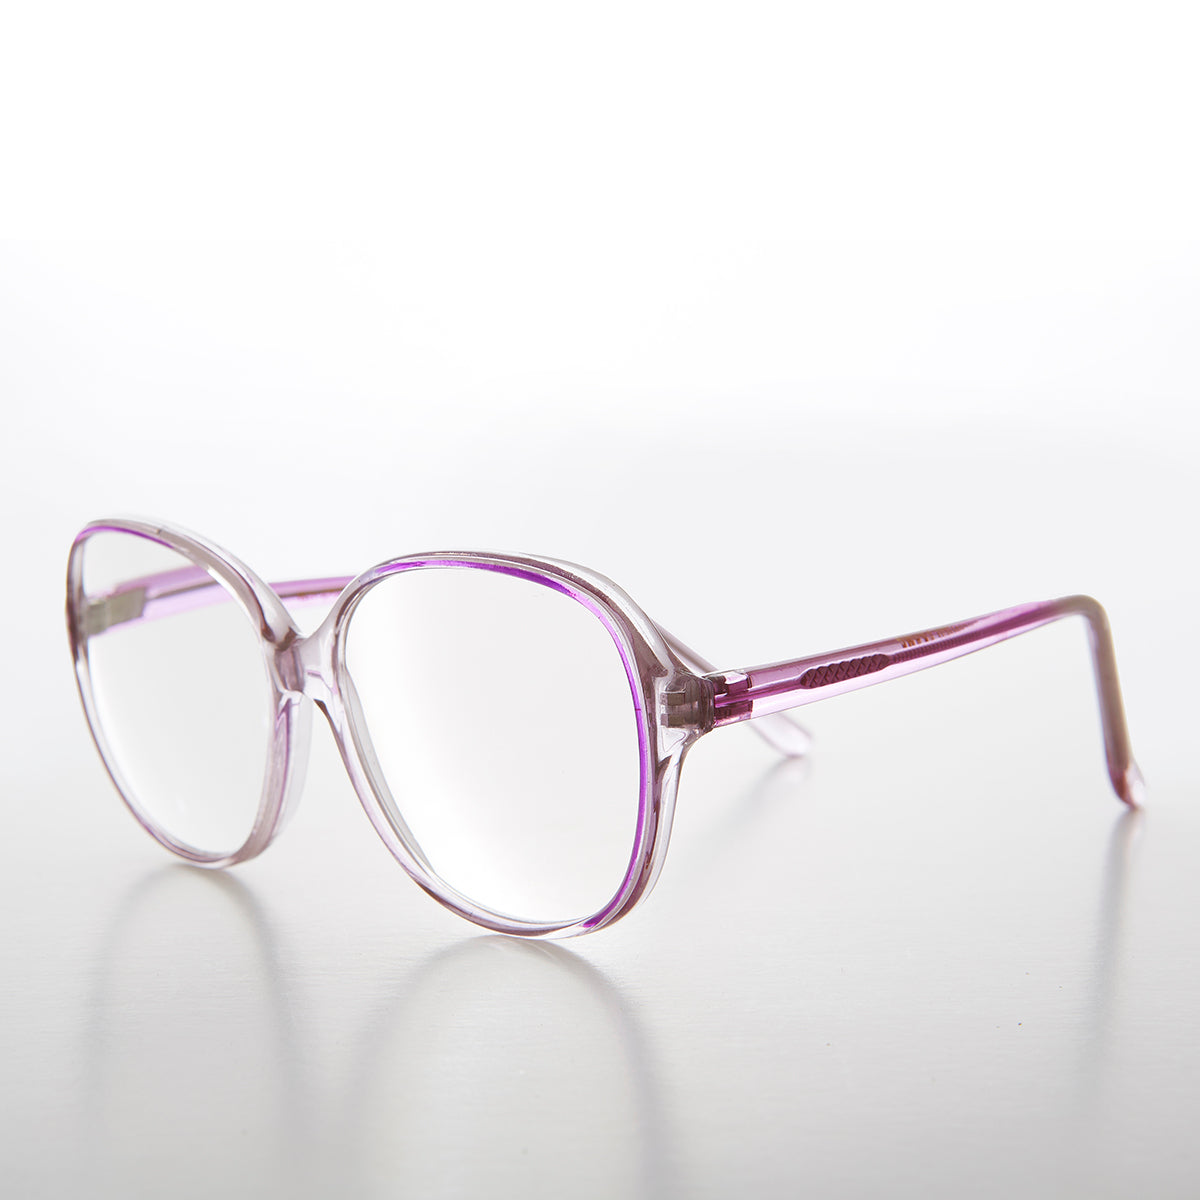 Big Clear Retro Reading Glasses with Purple Color Accent 